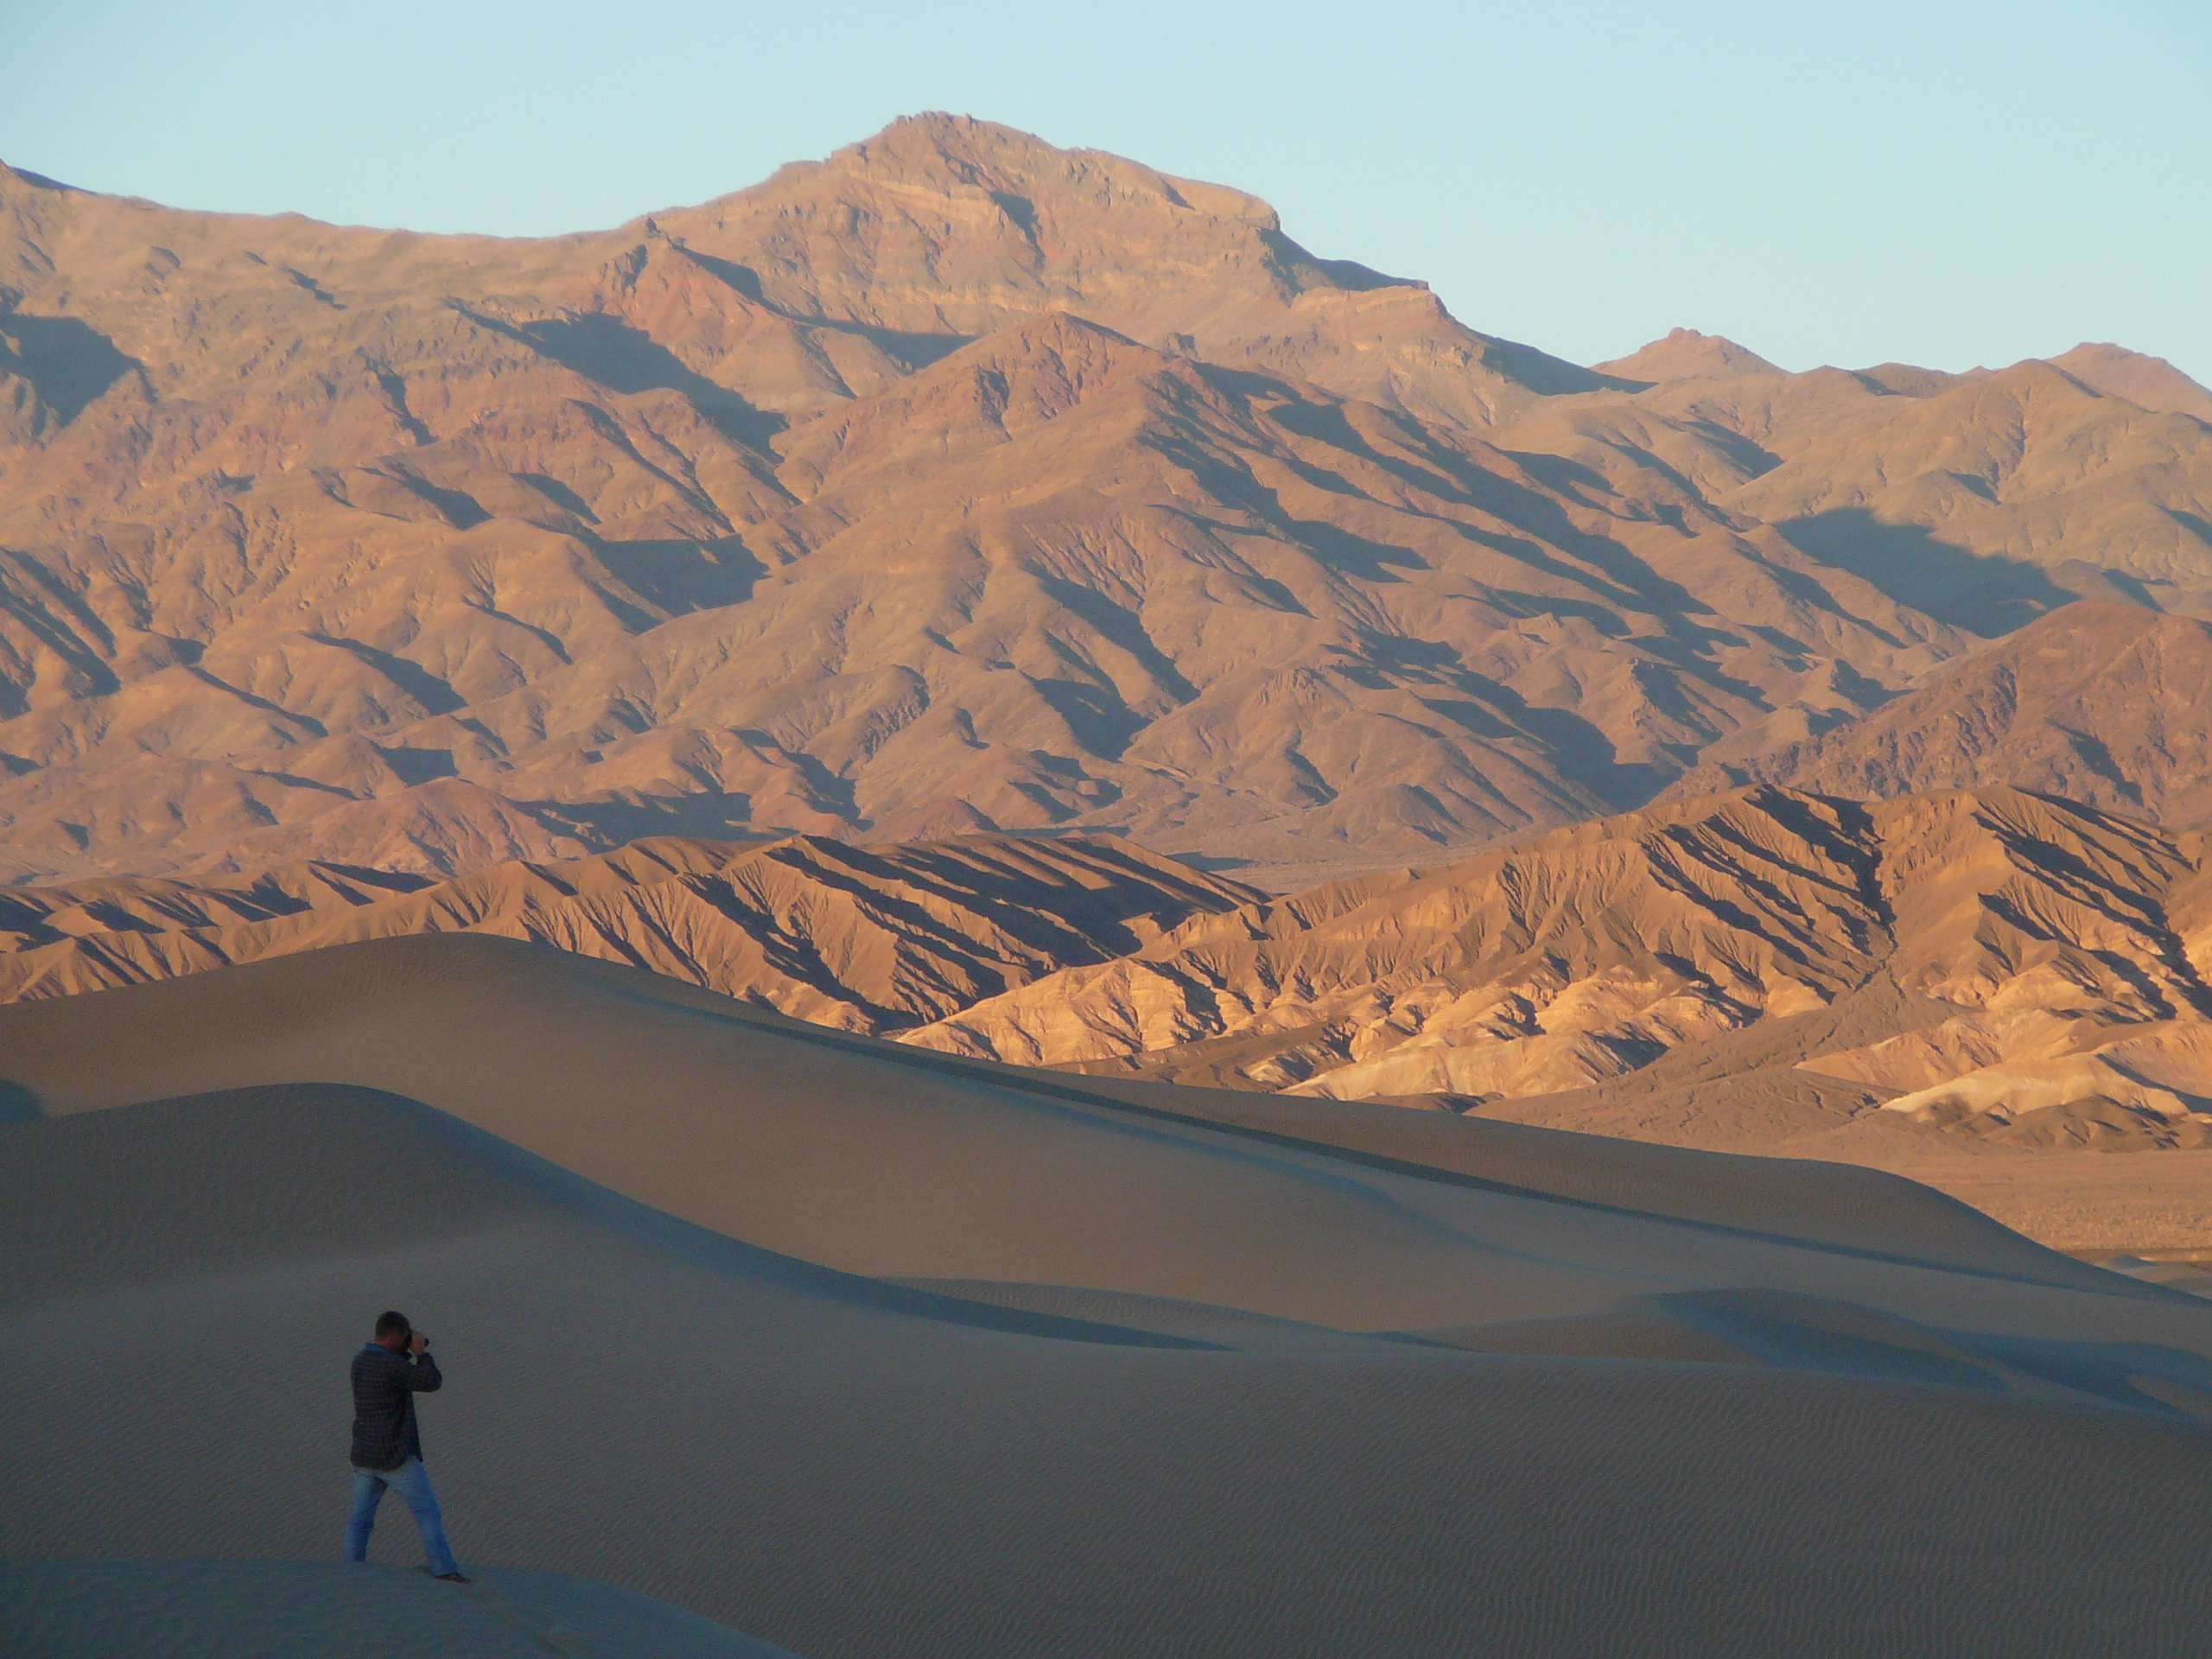 A desert mountain range in the background looks red-brown in late afternoon light. A single person stands with a camera on a sand dune in the foreground.